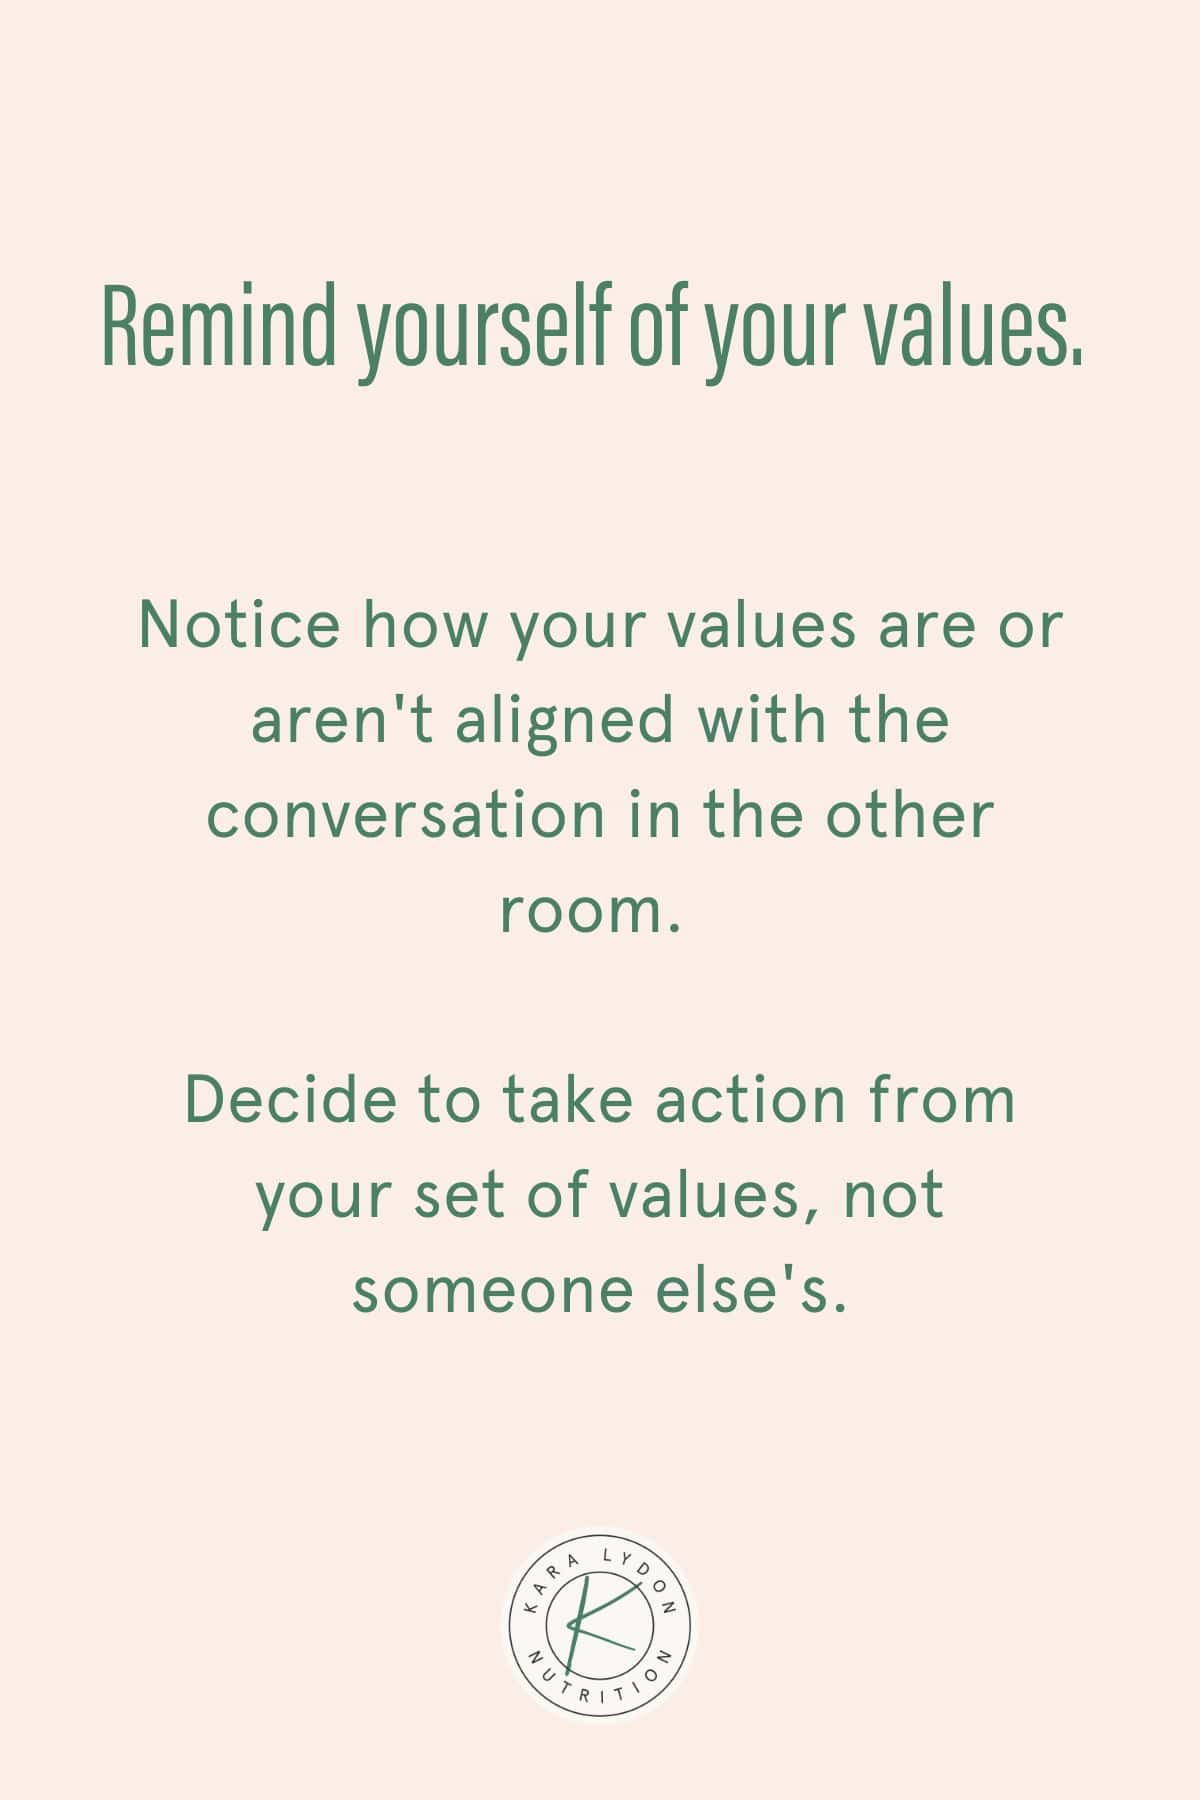 Graphic with quote: "Remind yourself of your values. Notice how your values are or aren't aligned with the conversation in the other room. Decide to take action from your set of values, not someone else's."